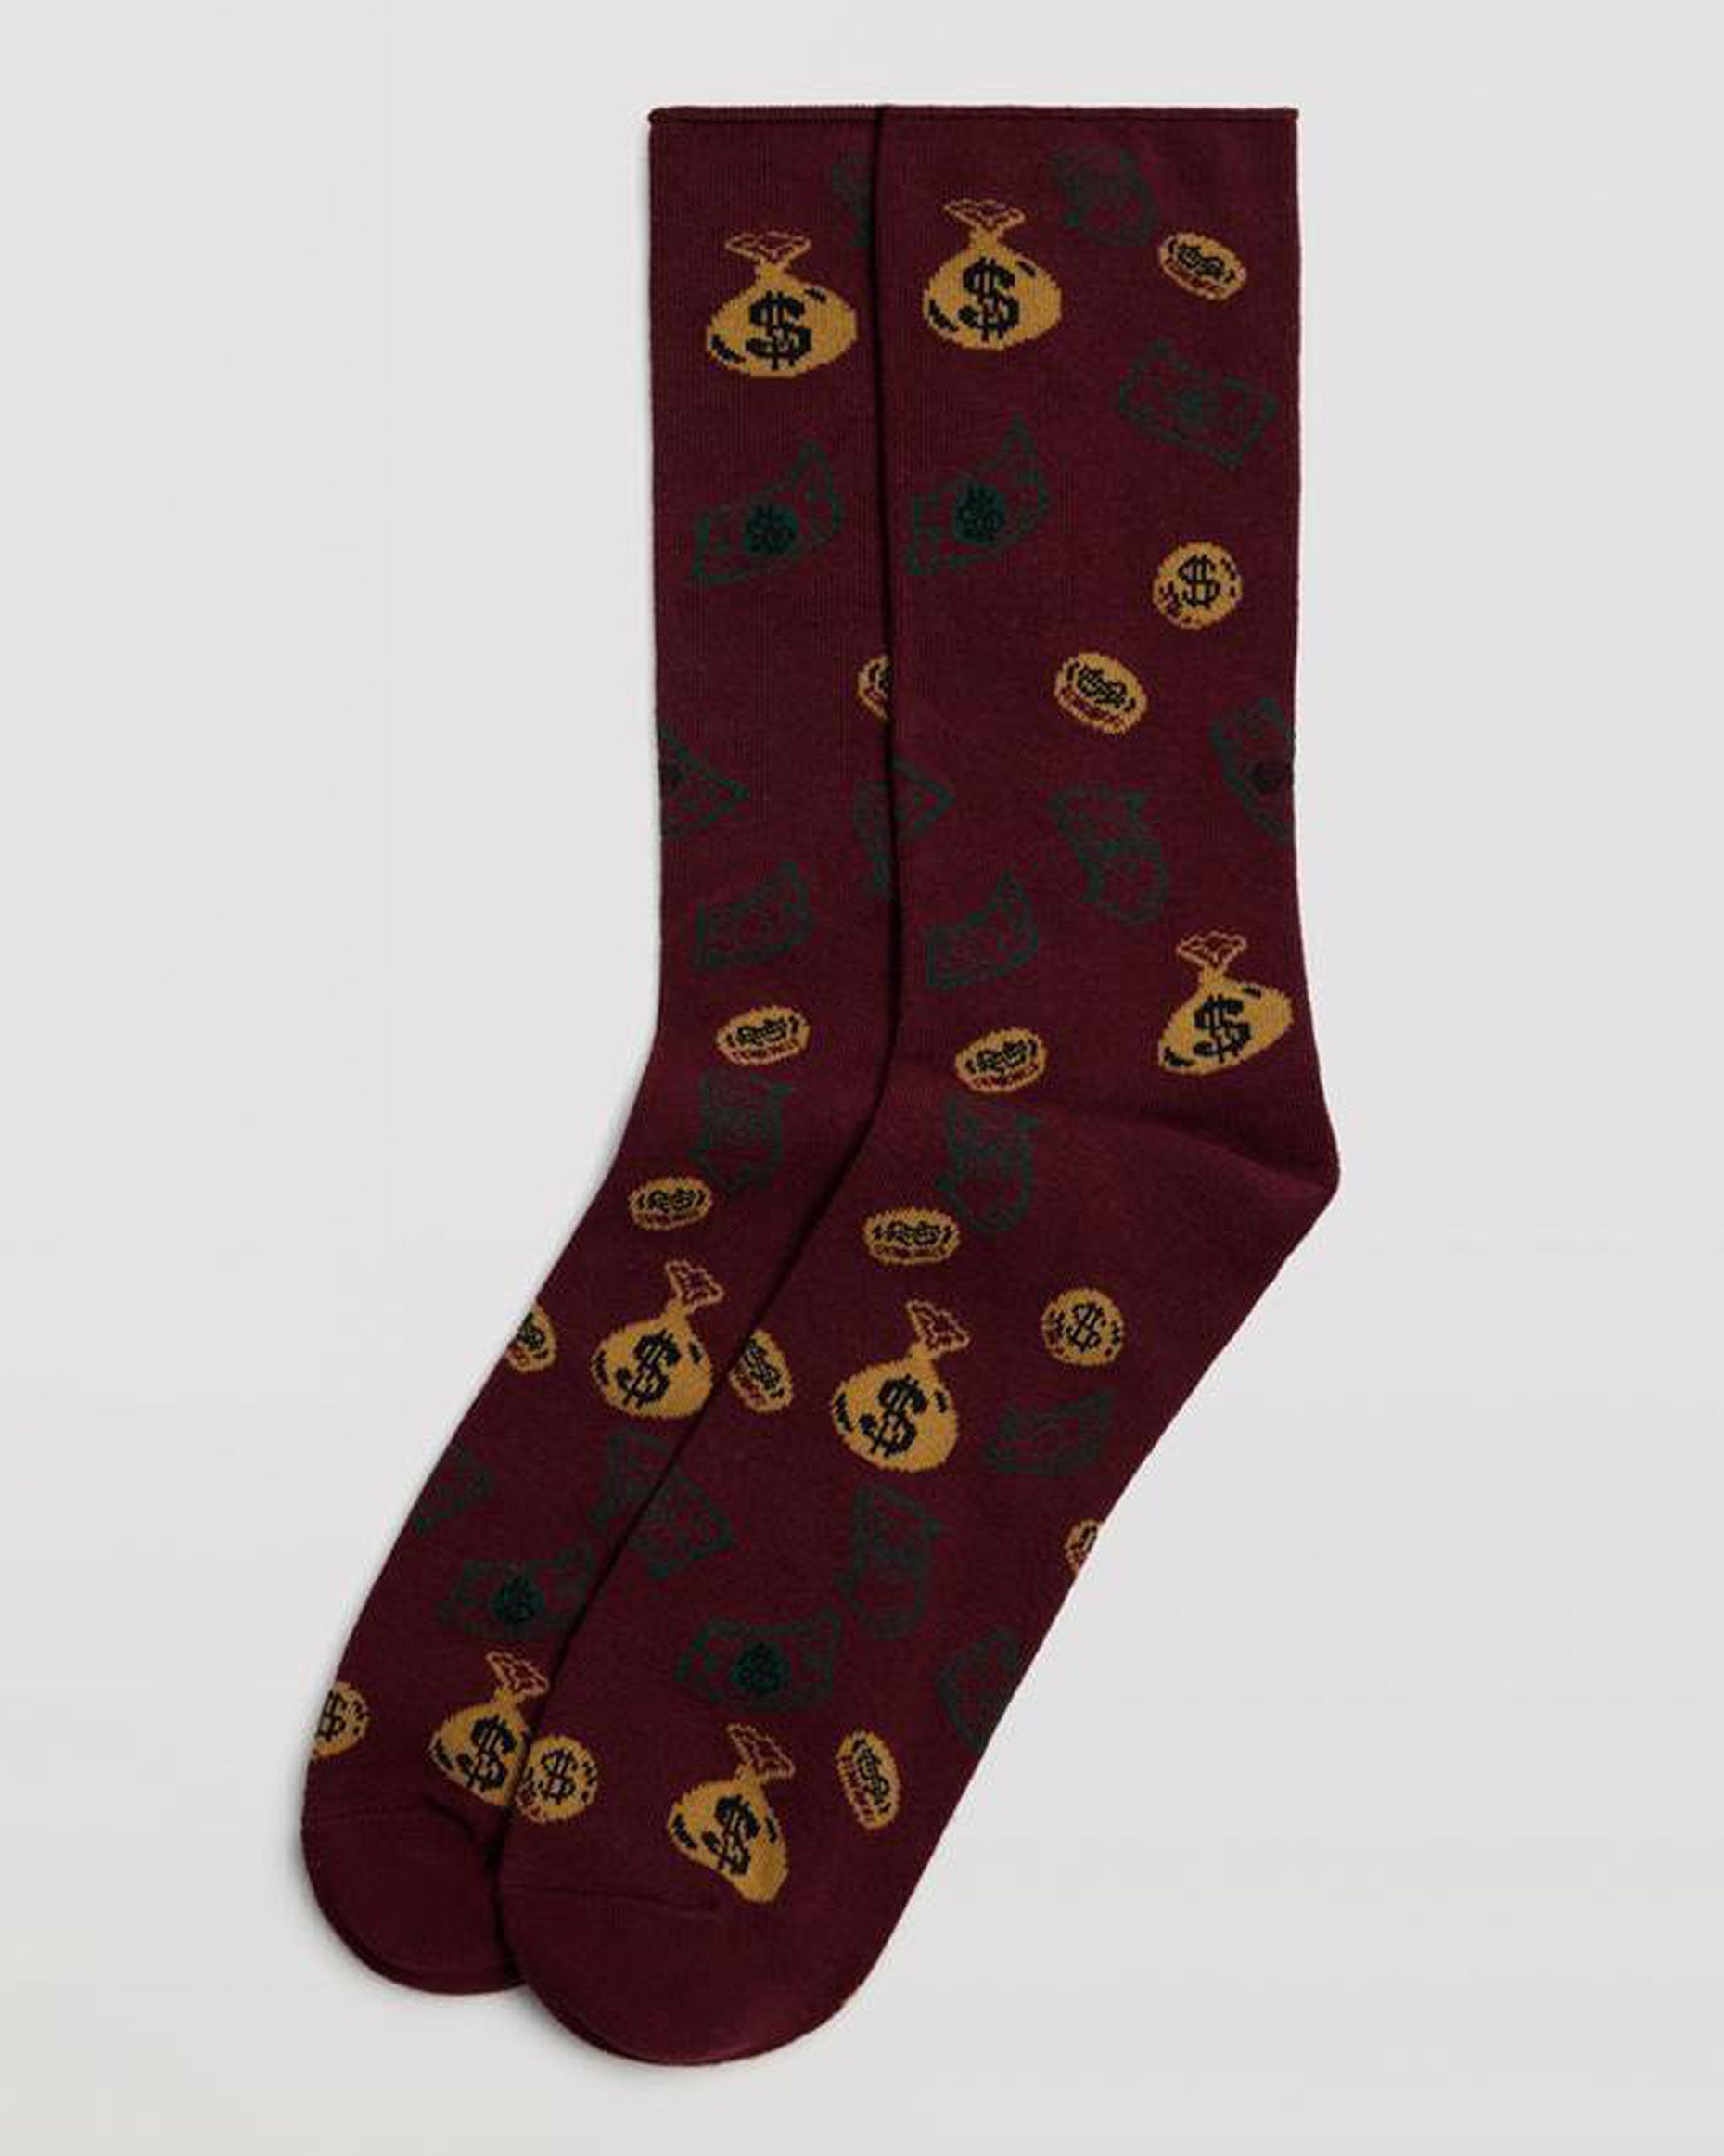 Ysabel Mora 22881 Money Socks - Wine cotton mix crew length ankle socks with a money themed pattern of coins, bags of cash with dollar signs and bank notes.